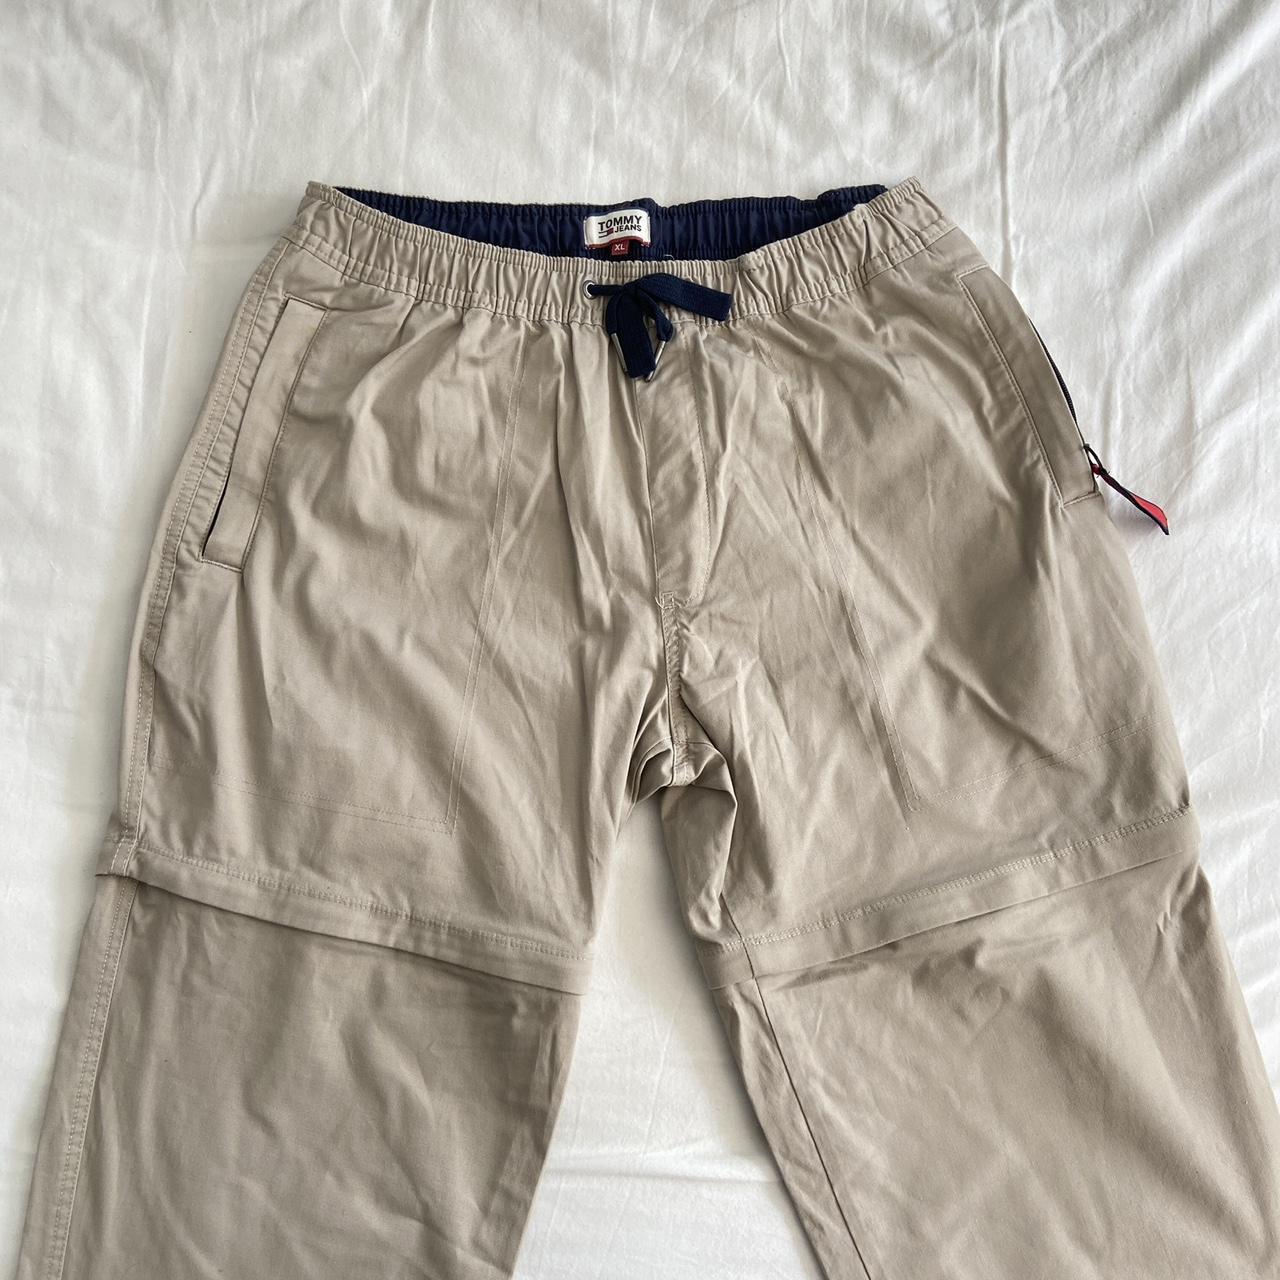 Tommy Jeans Cargos No flaws Size - XL #cargos... - Depop